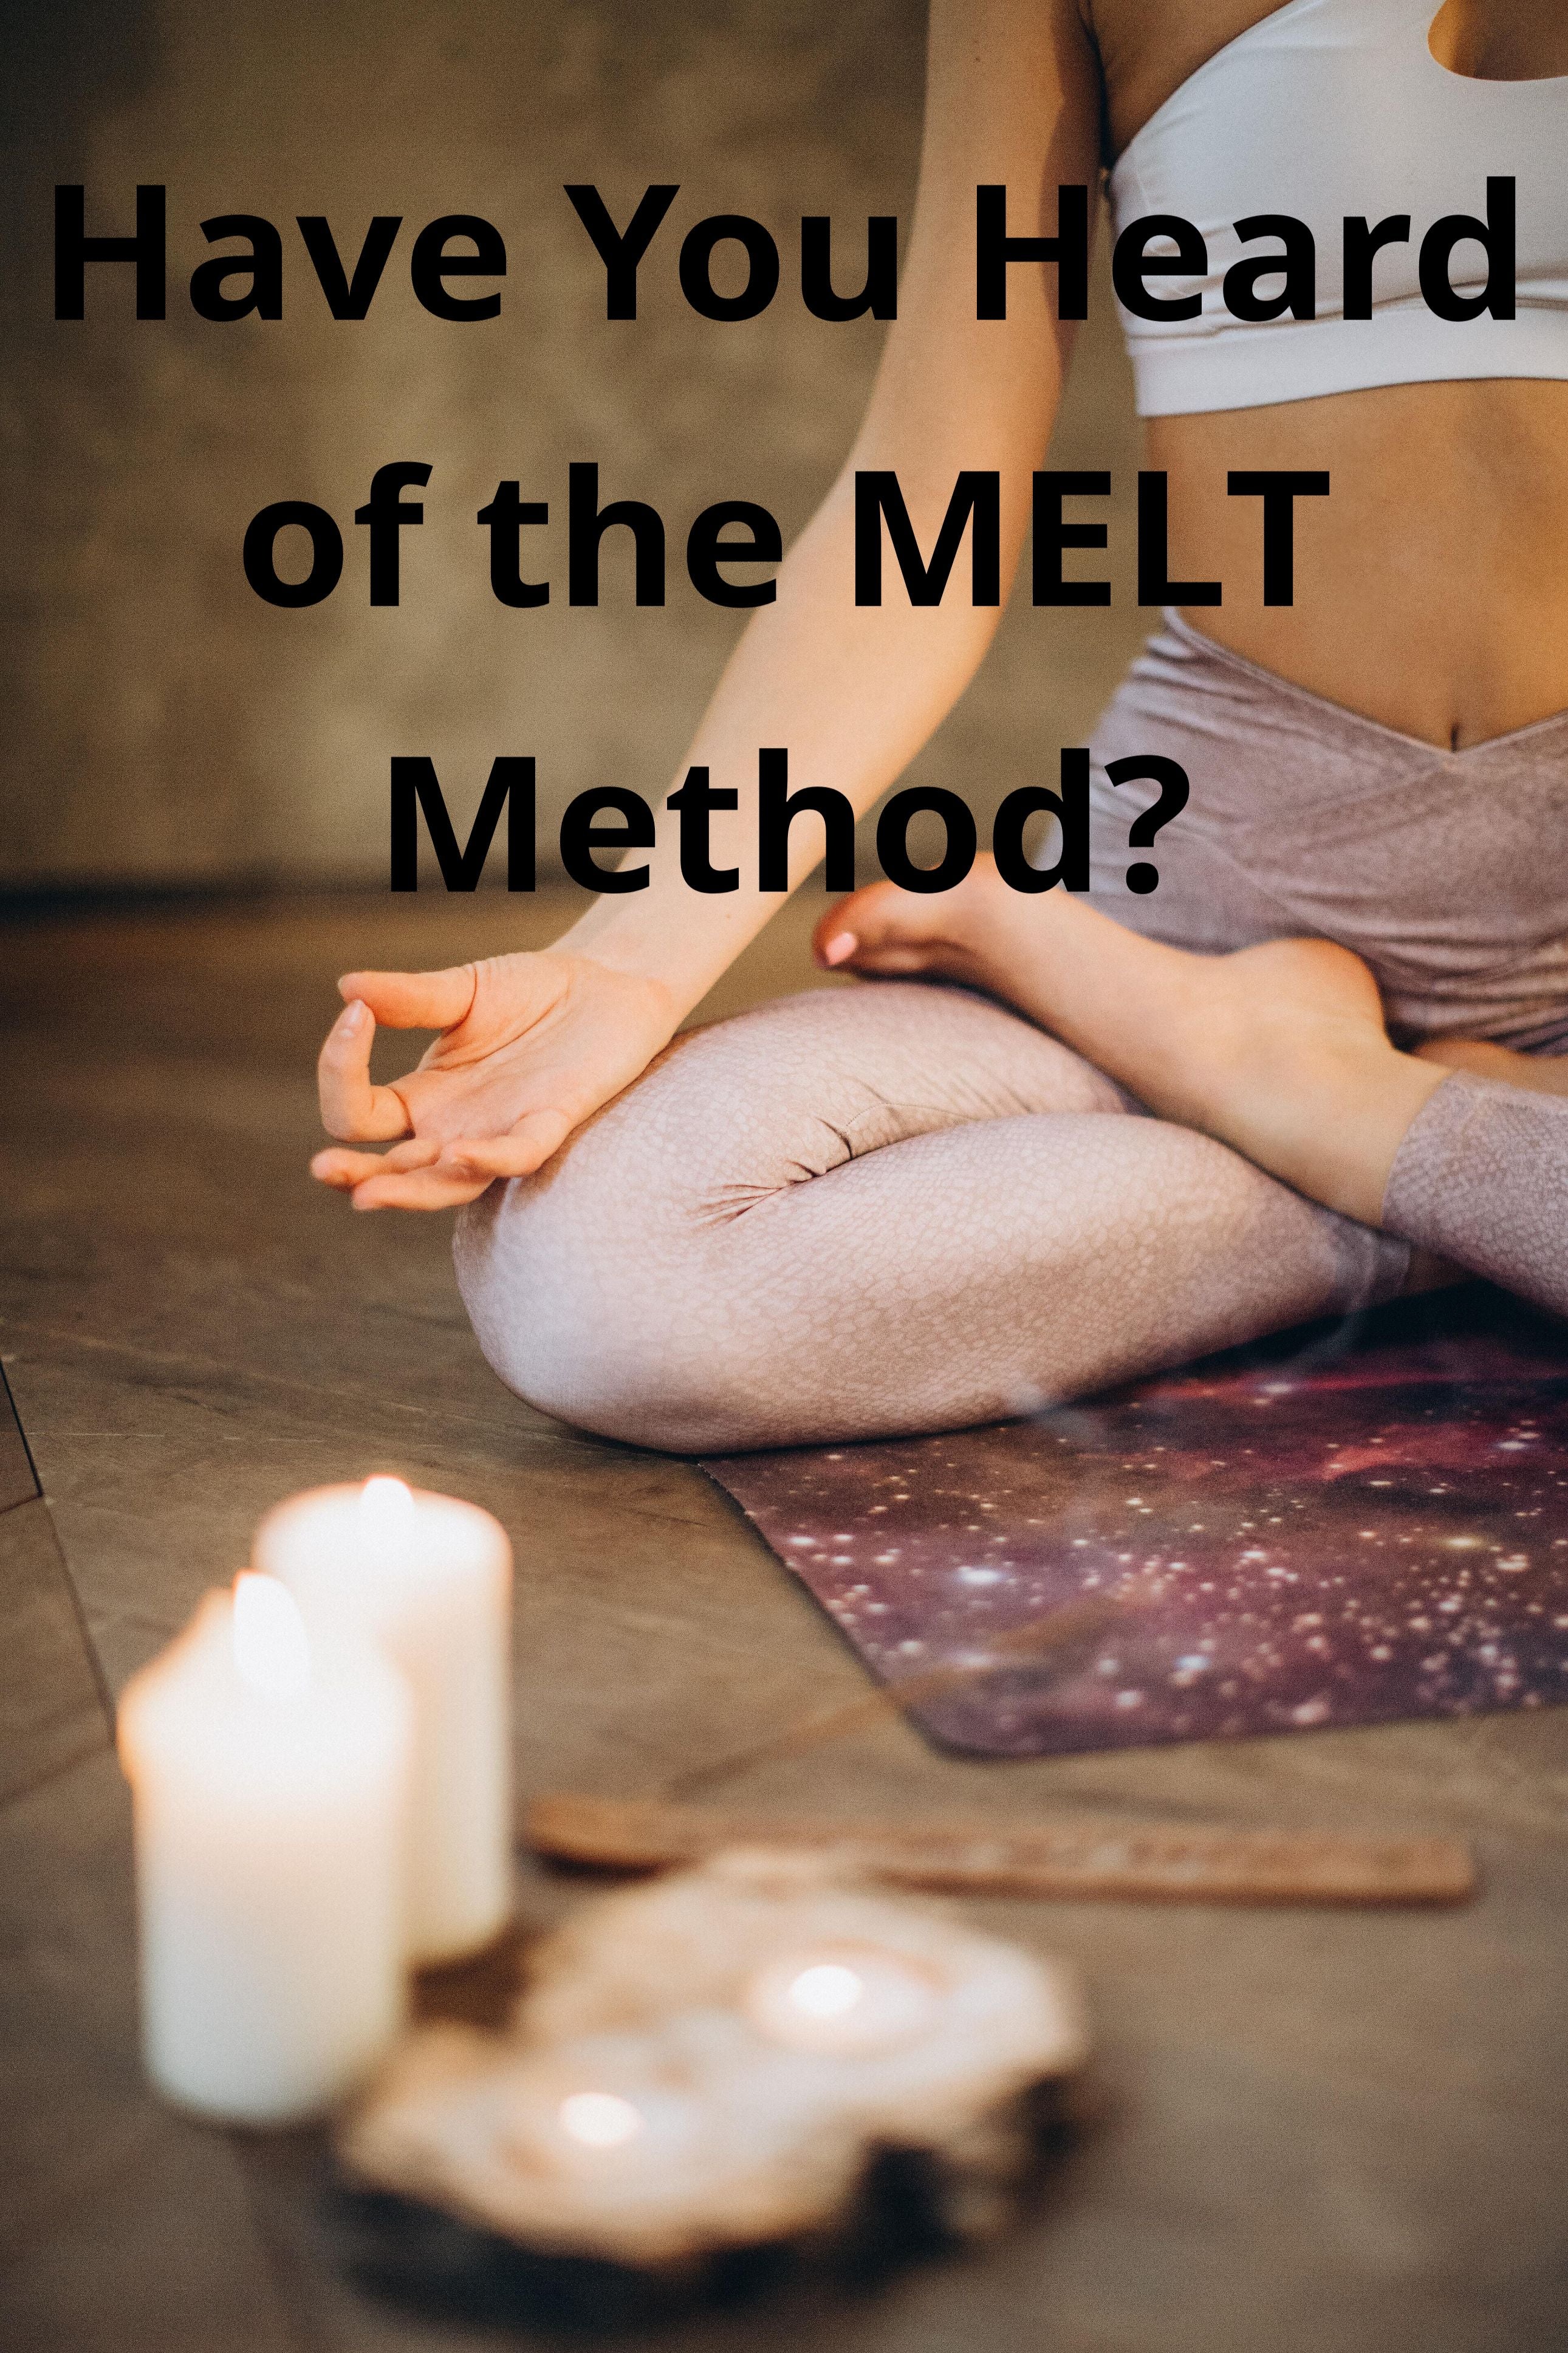 Have You Heard Of The MELT Method?